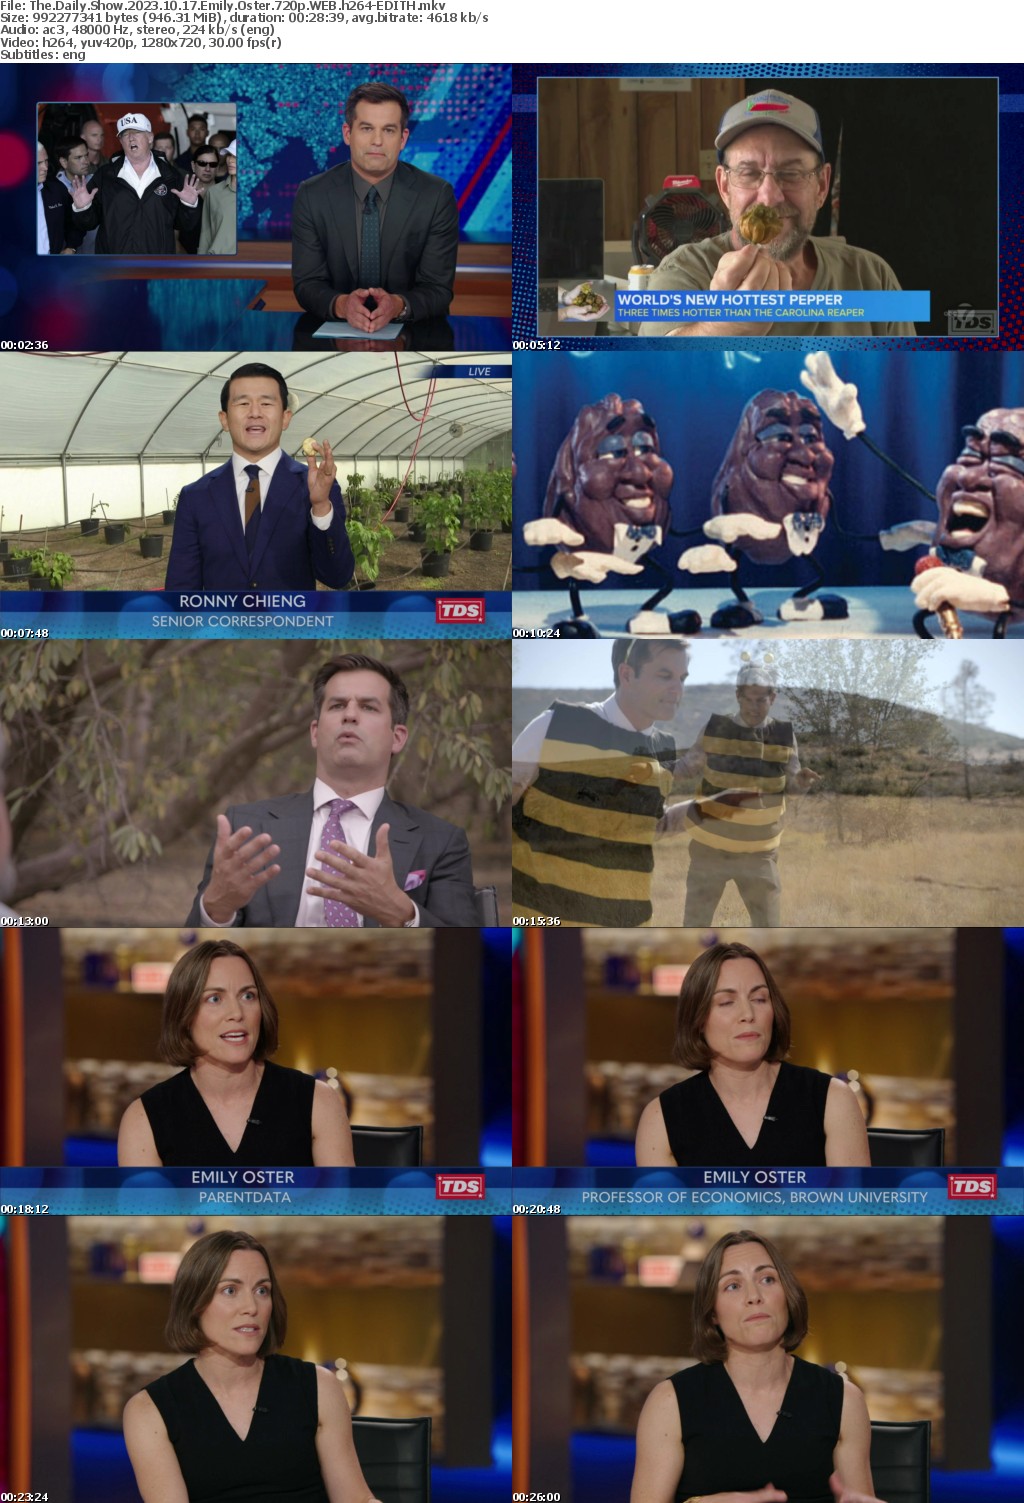 The Daily Show 2023 10 17 Emily Oster 720p WEB h264-EDITH